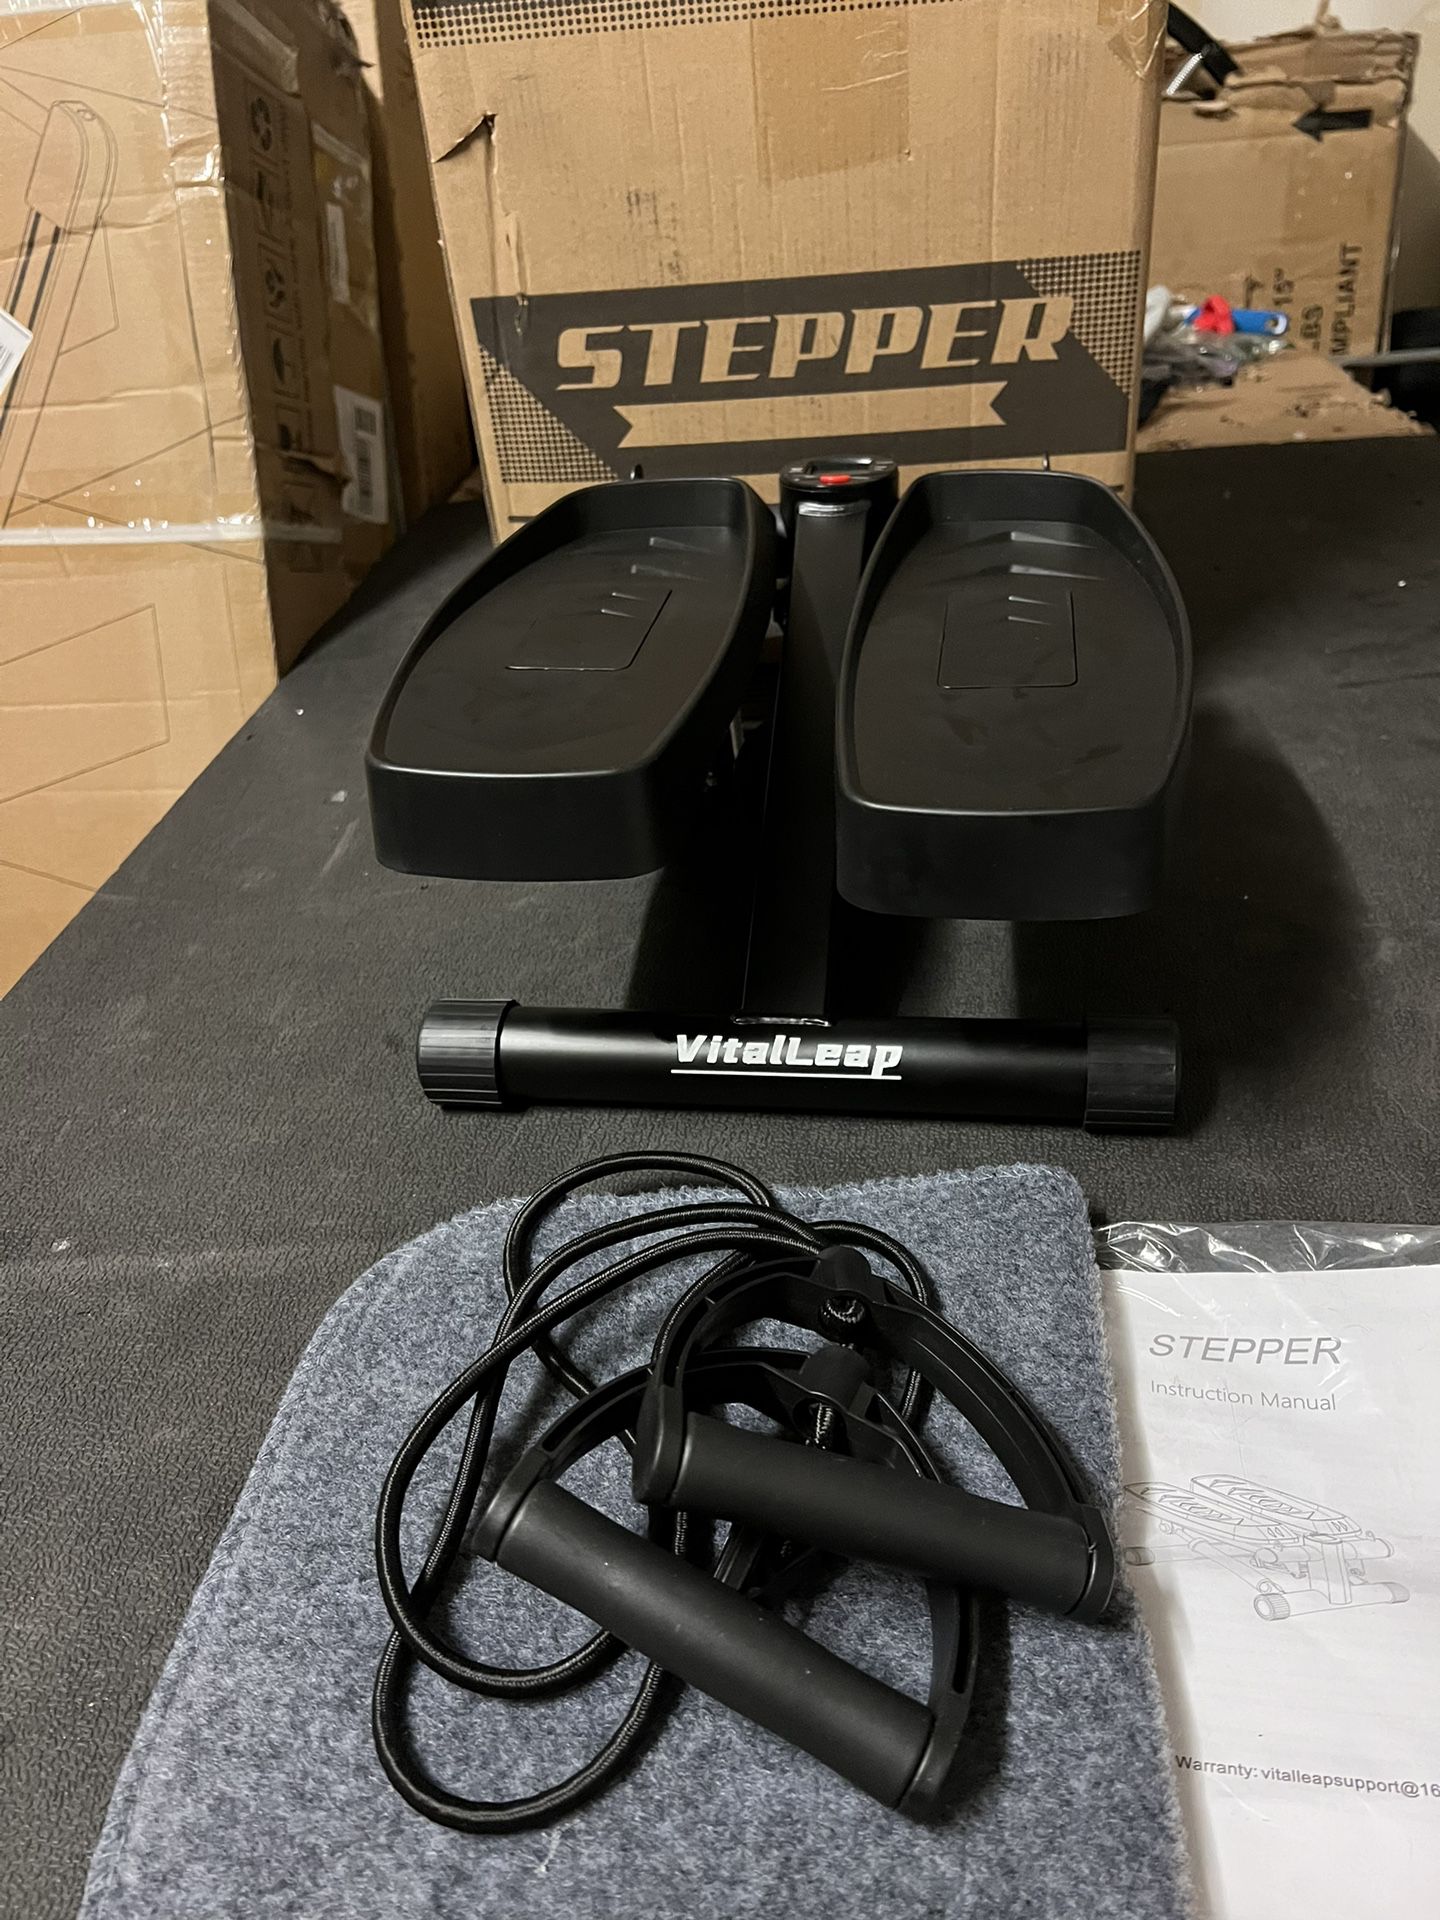 Stair Stepper Vitaleap With Resistance Band For Exercise Workout 